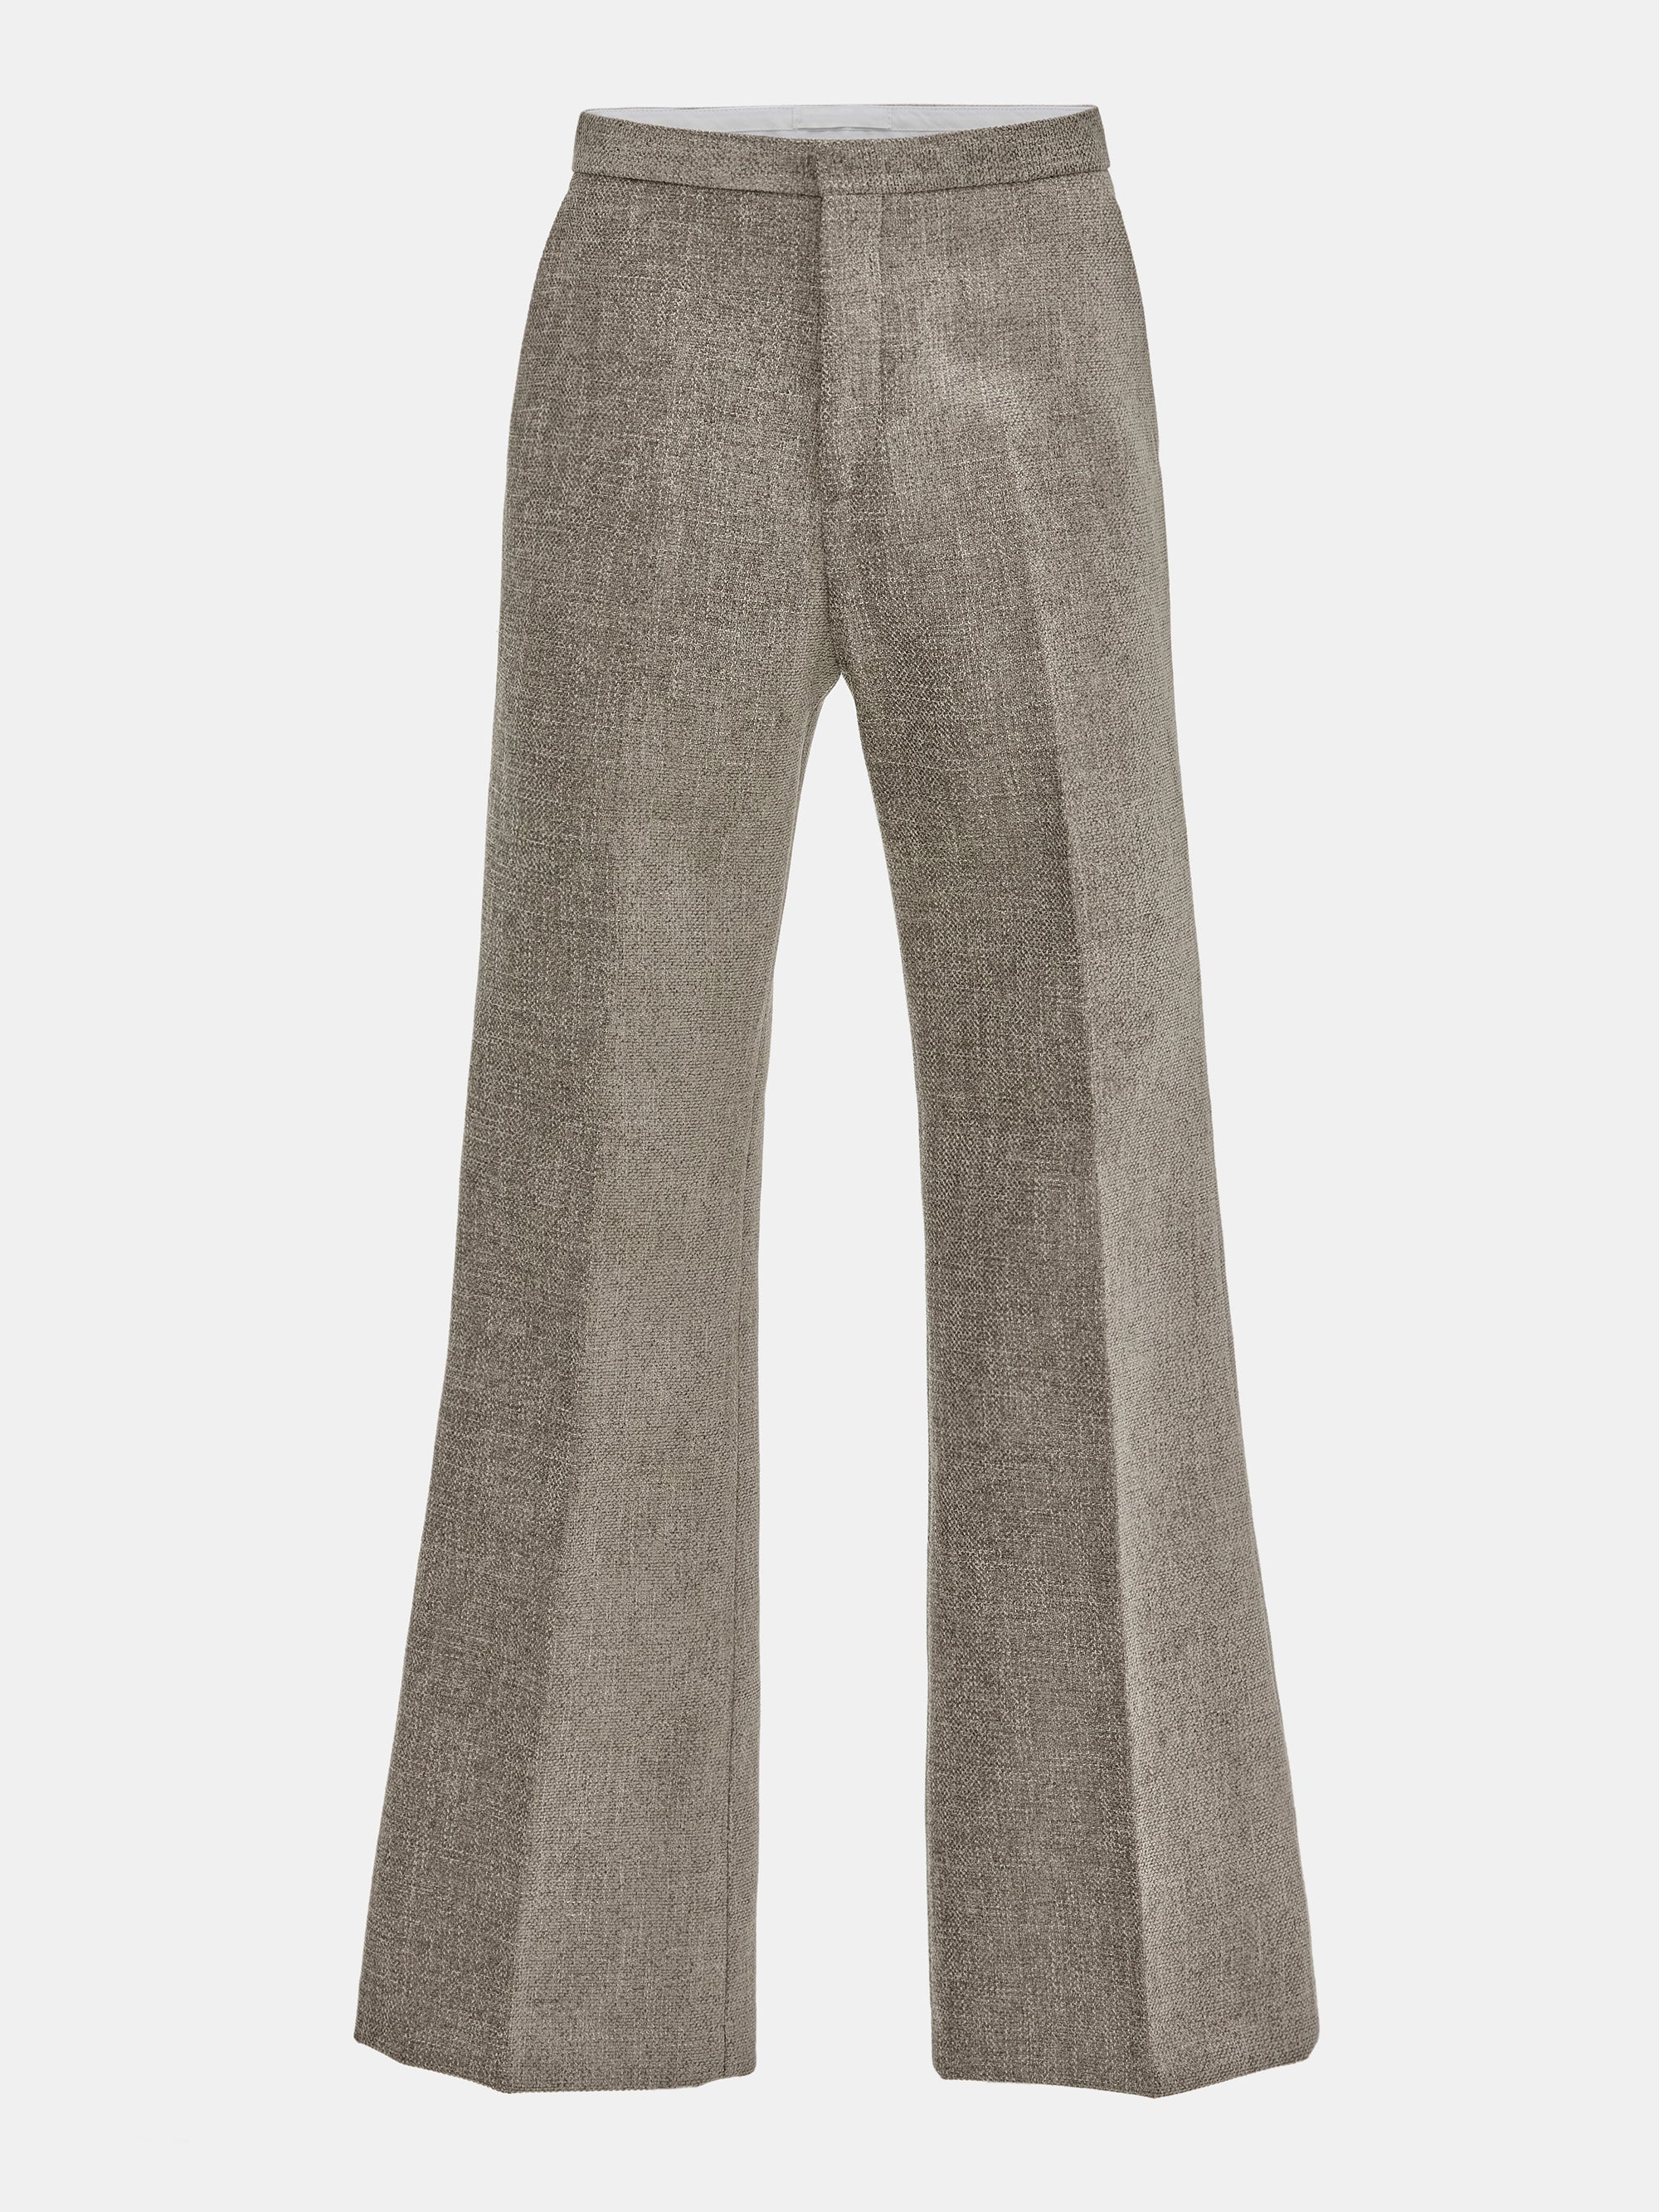 Tailored Tweed Trousers, Taupe Melange